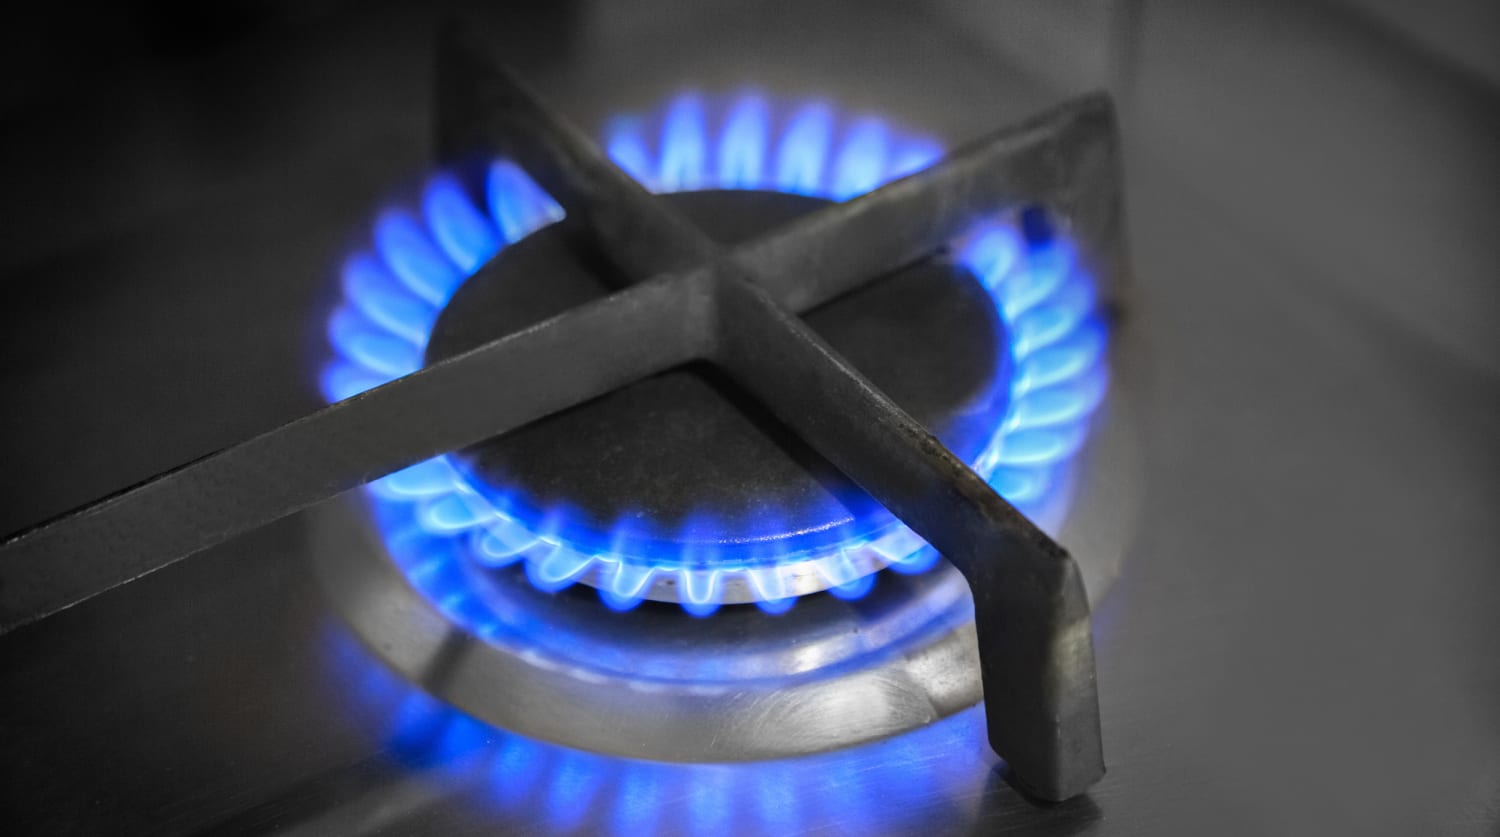 Gas stove ban 'on the table' for federal agency: reports